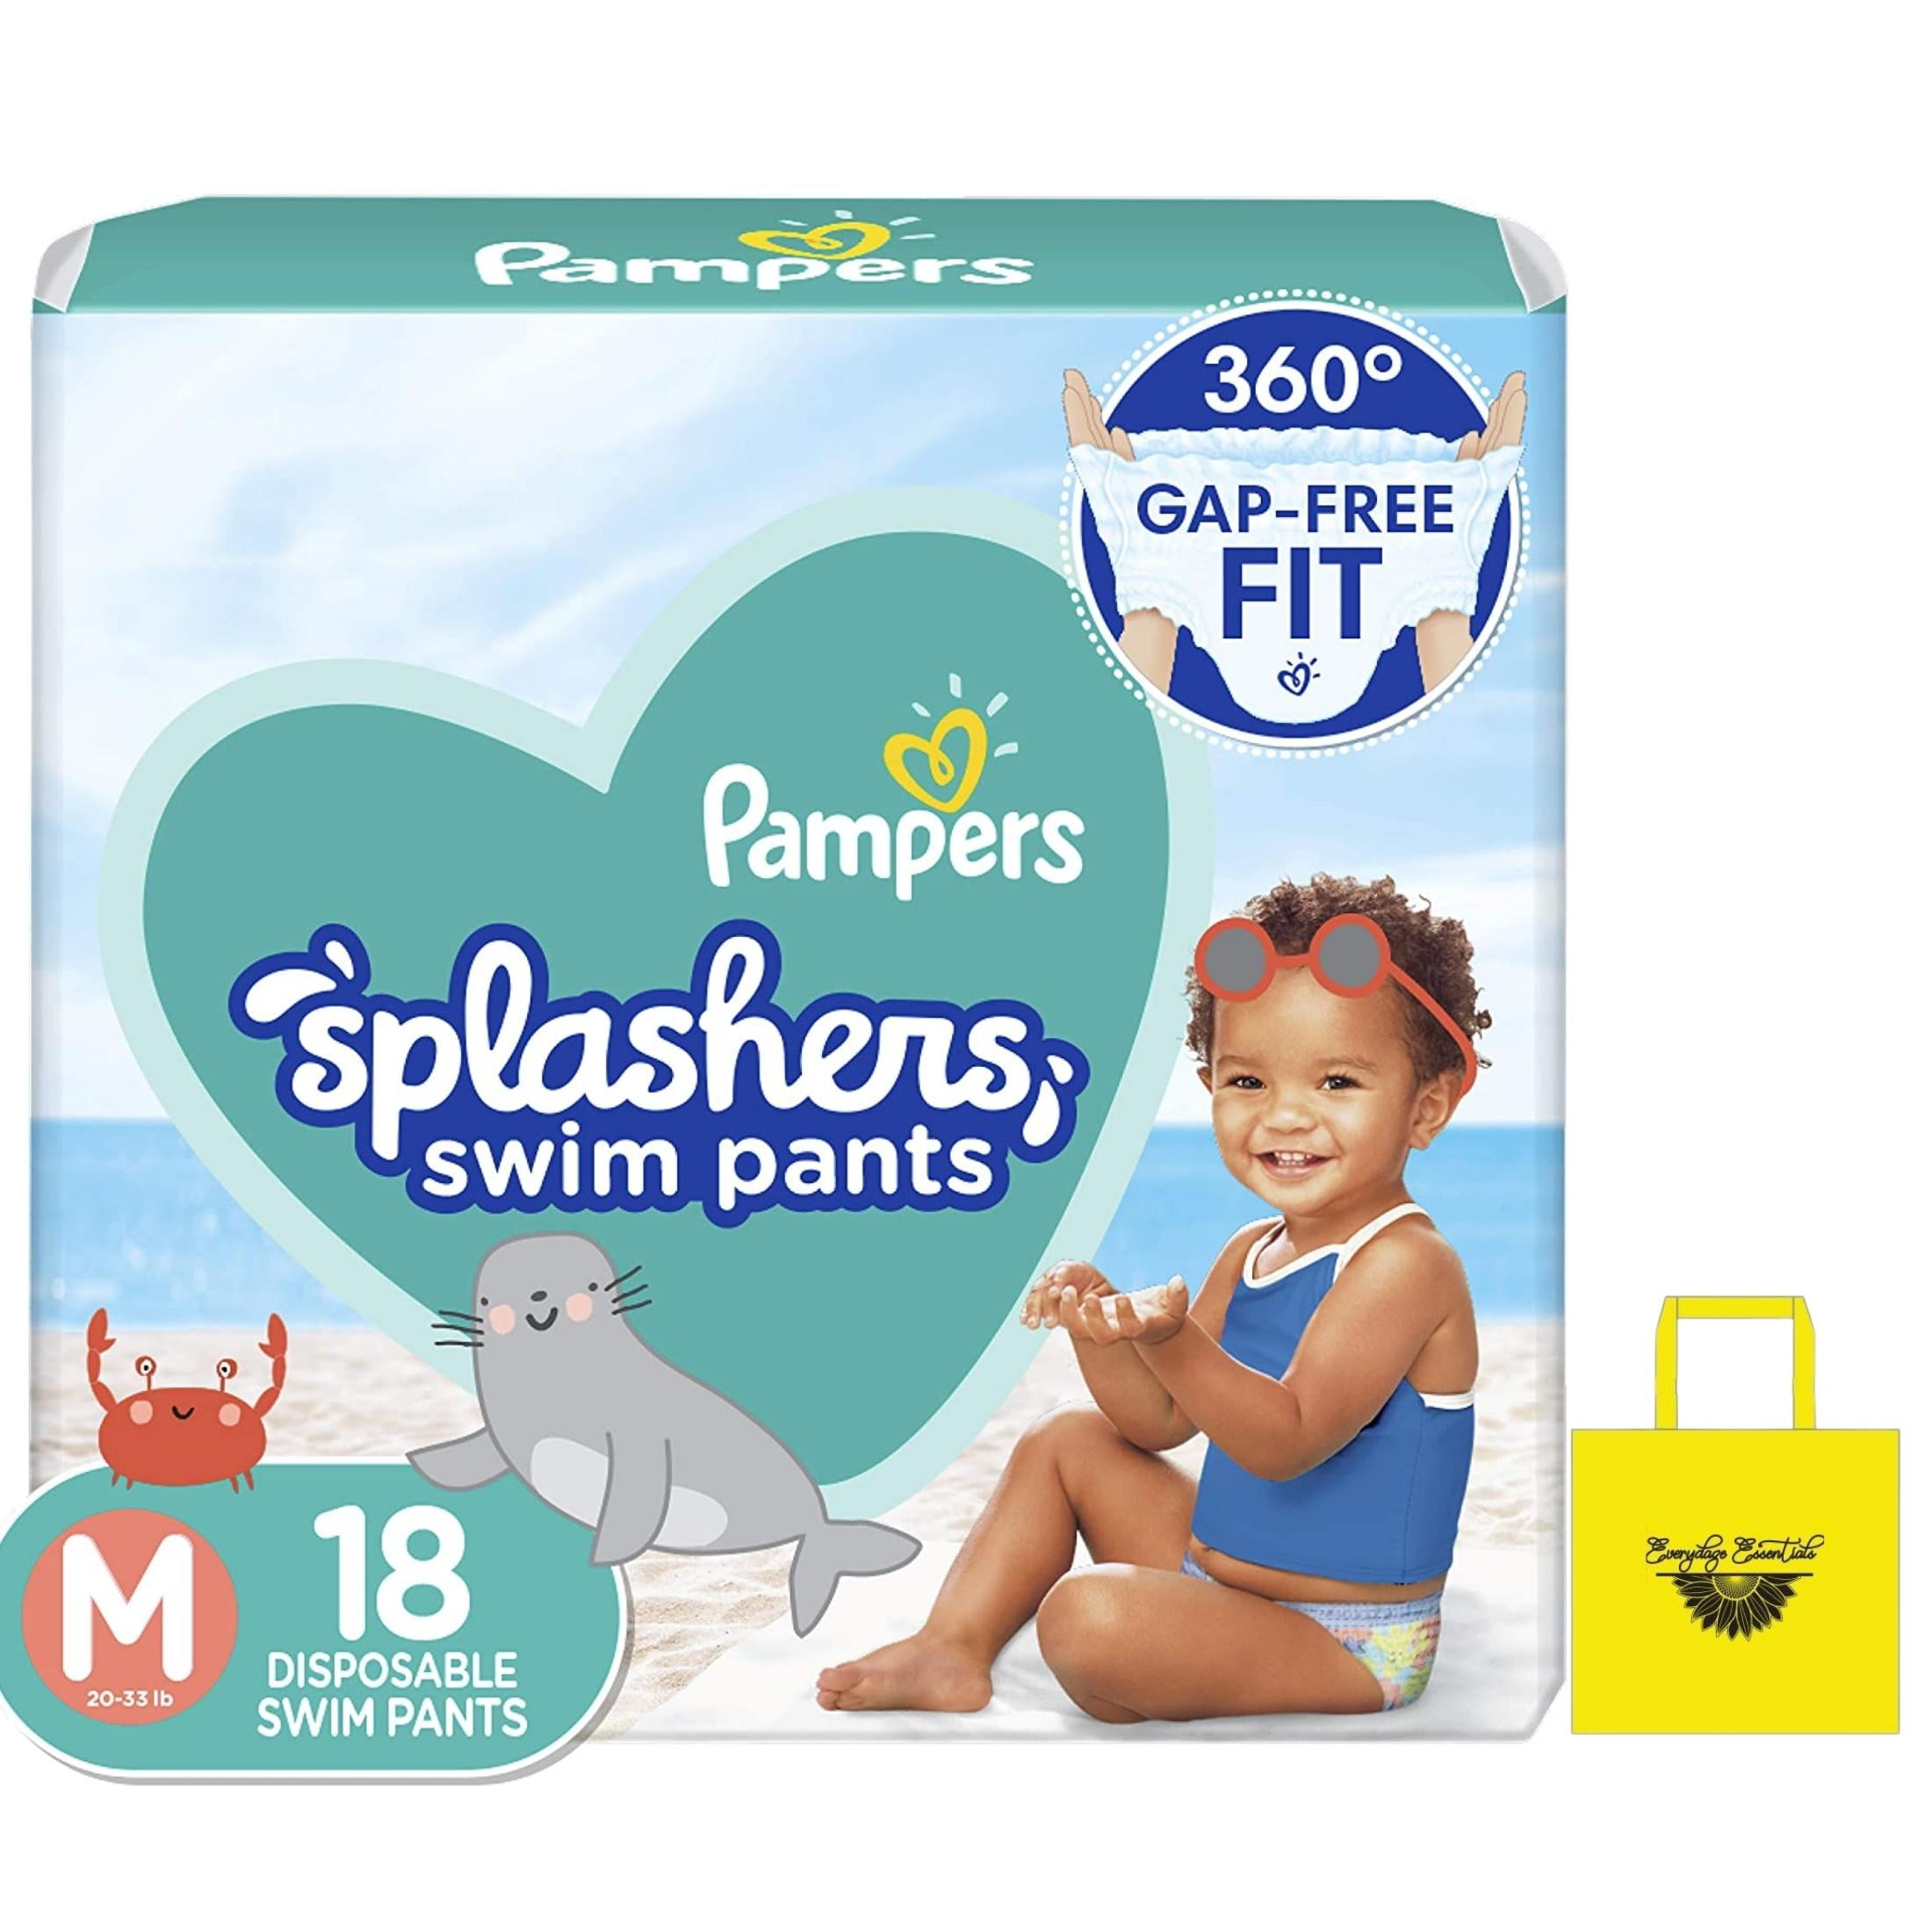 Everydaze Essentials Pampers Splashers Swim Diapers Size M, 18-Count Pack  Infant Diaper 360 Degree Gap-Free Fit Waistband Dual Leak-Guard Barriers  Swimwear-Style Beach Pool Characters & Bonus Tote Bag 